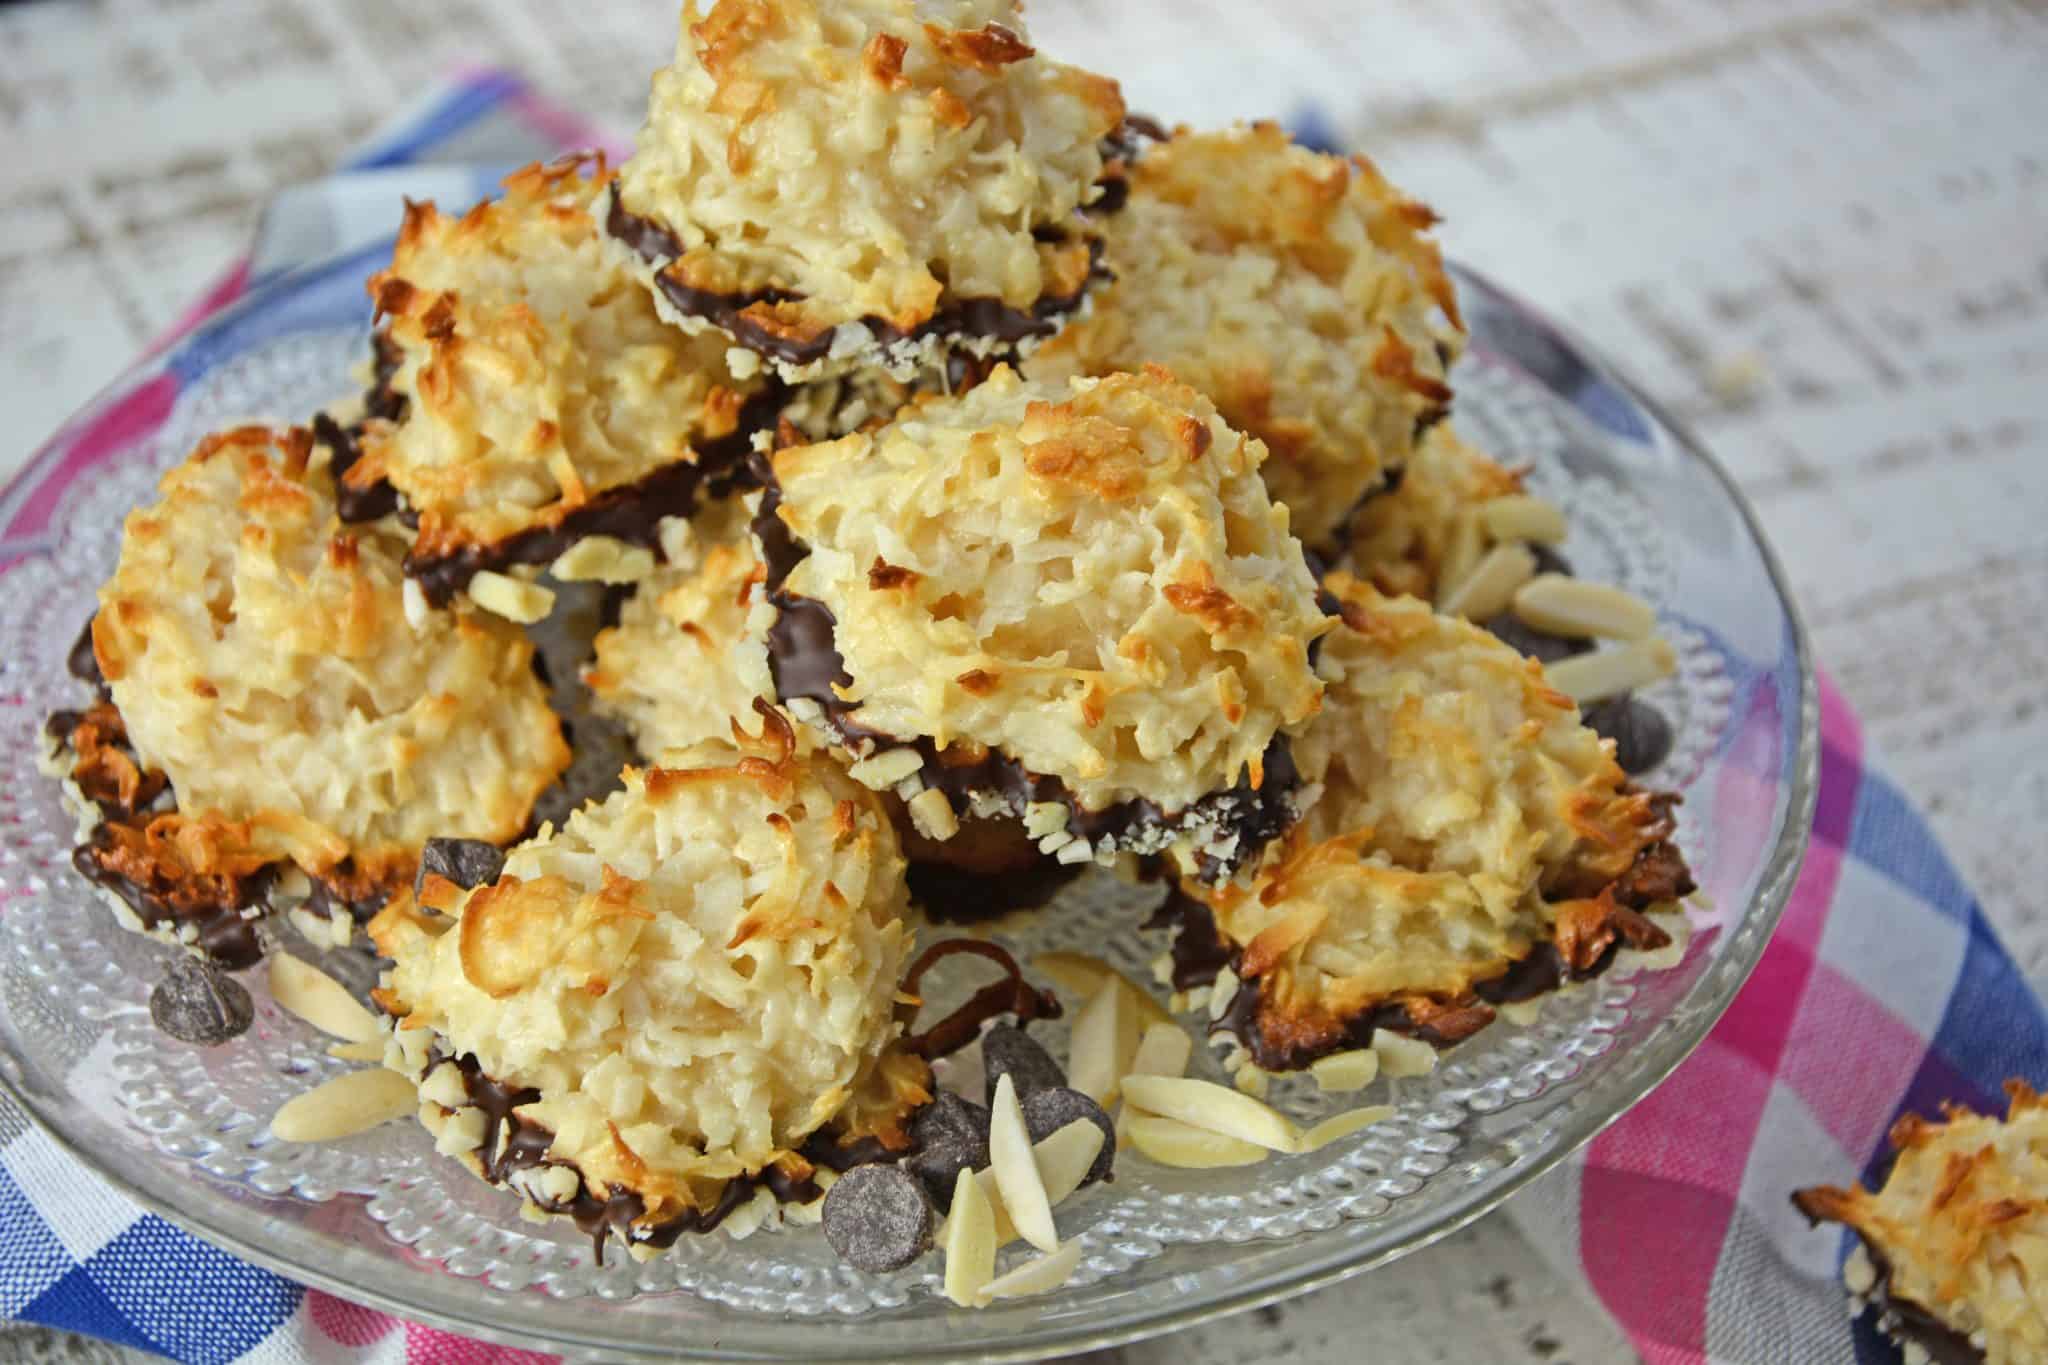 Almond Coconut Macaroons are light, fluffy coconut biscuits dipped in chocolate and almonds. Perfect as a dessert, for tea for as a an afternoon snack. #coconutmacaroons #macaroonsrecipe www.savoryexperiments.com 